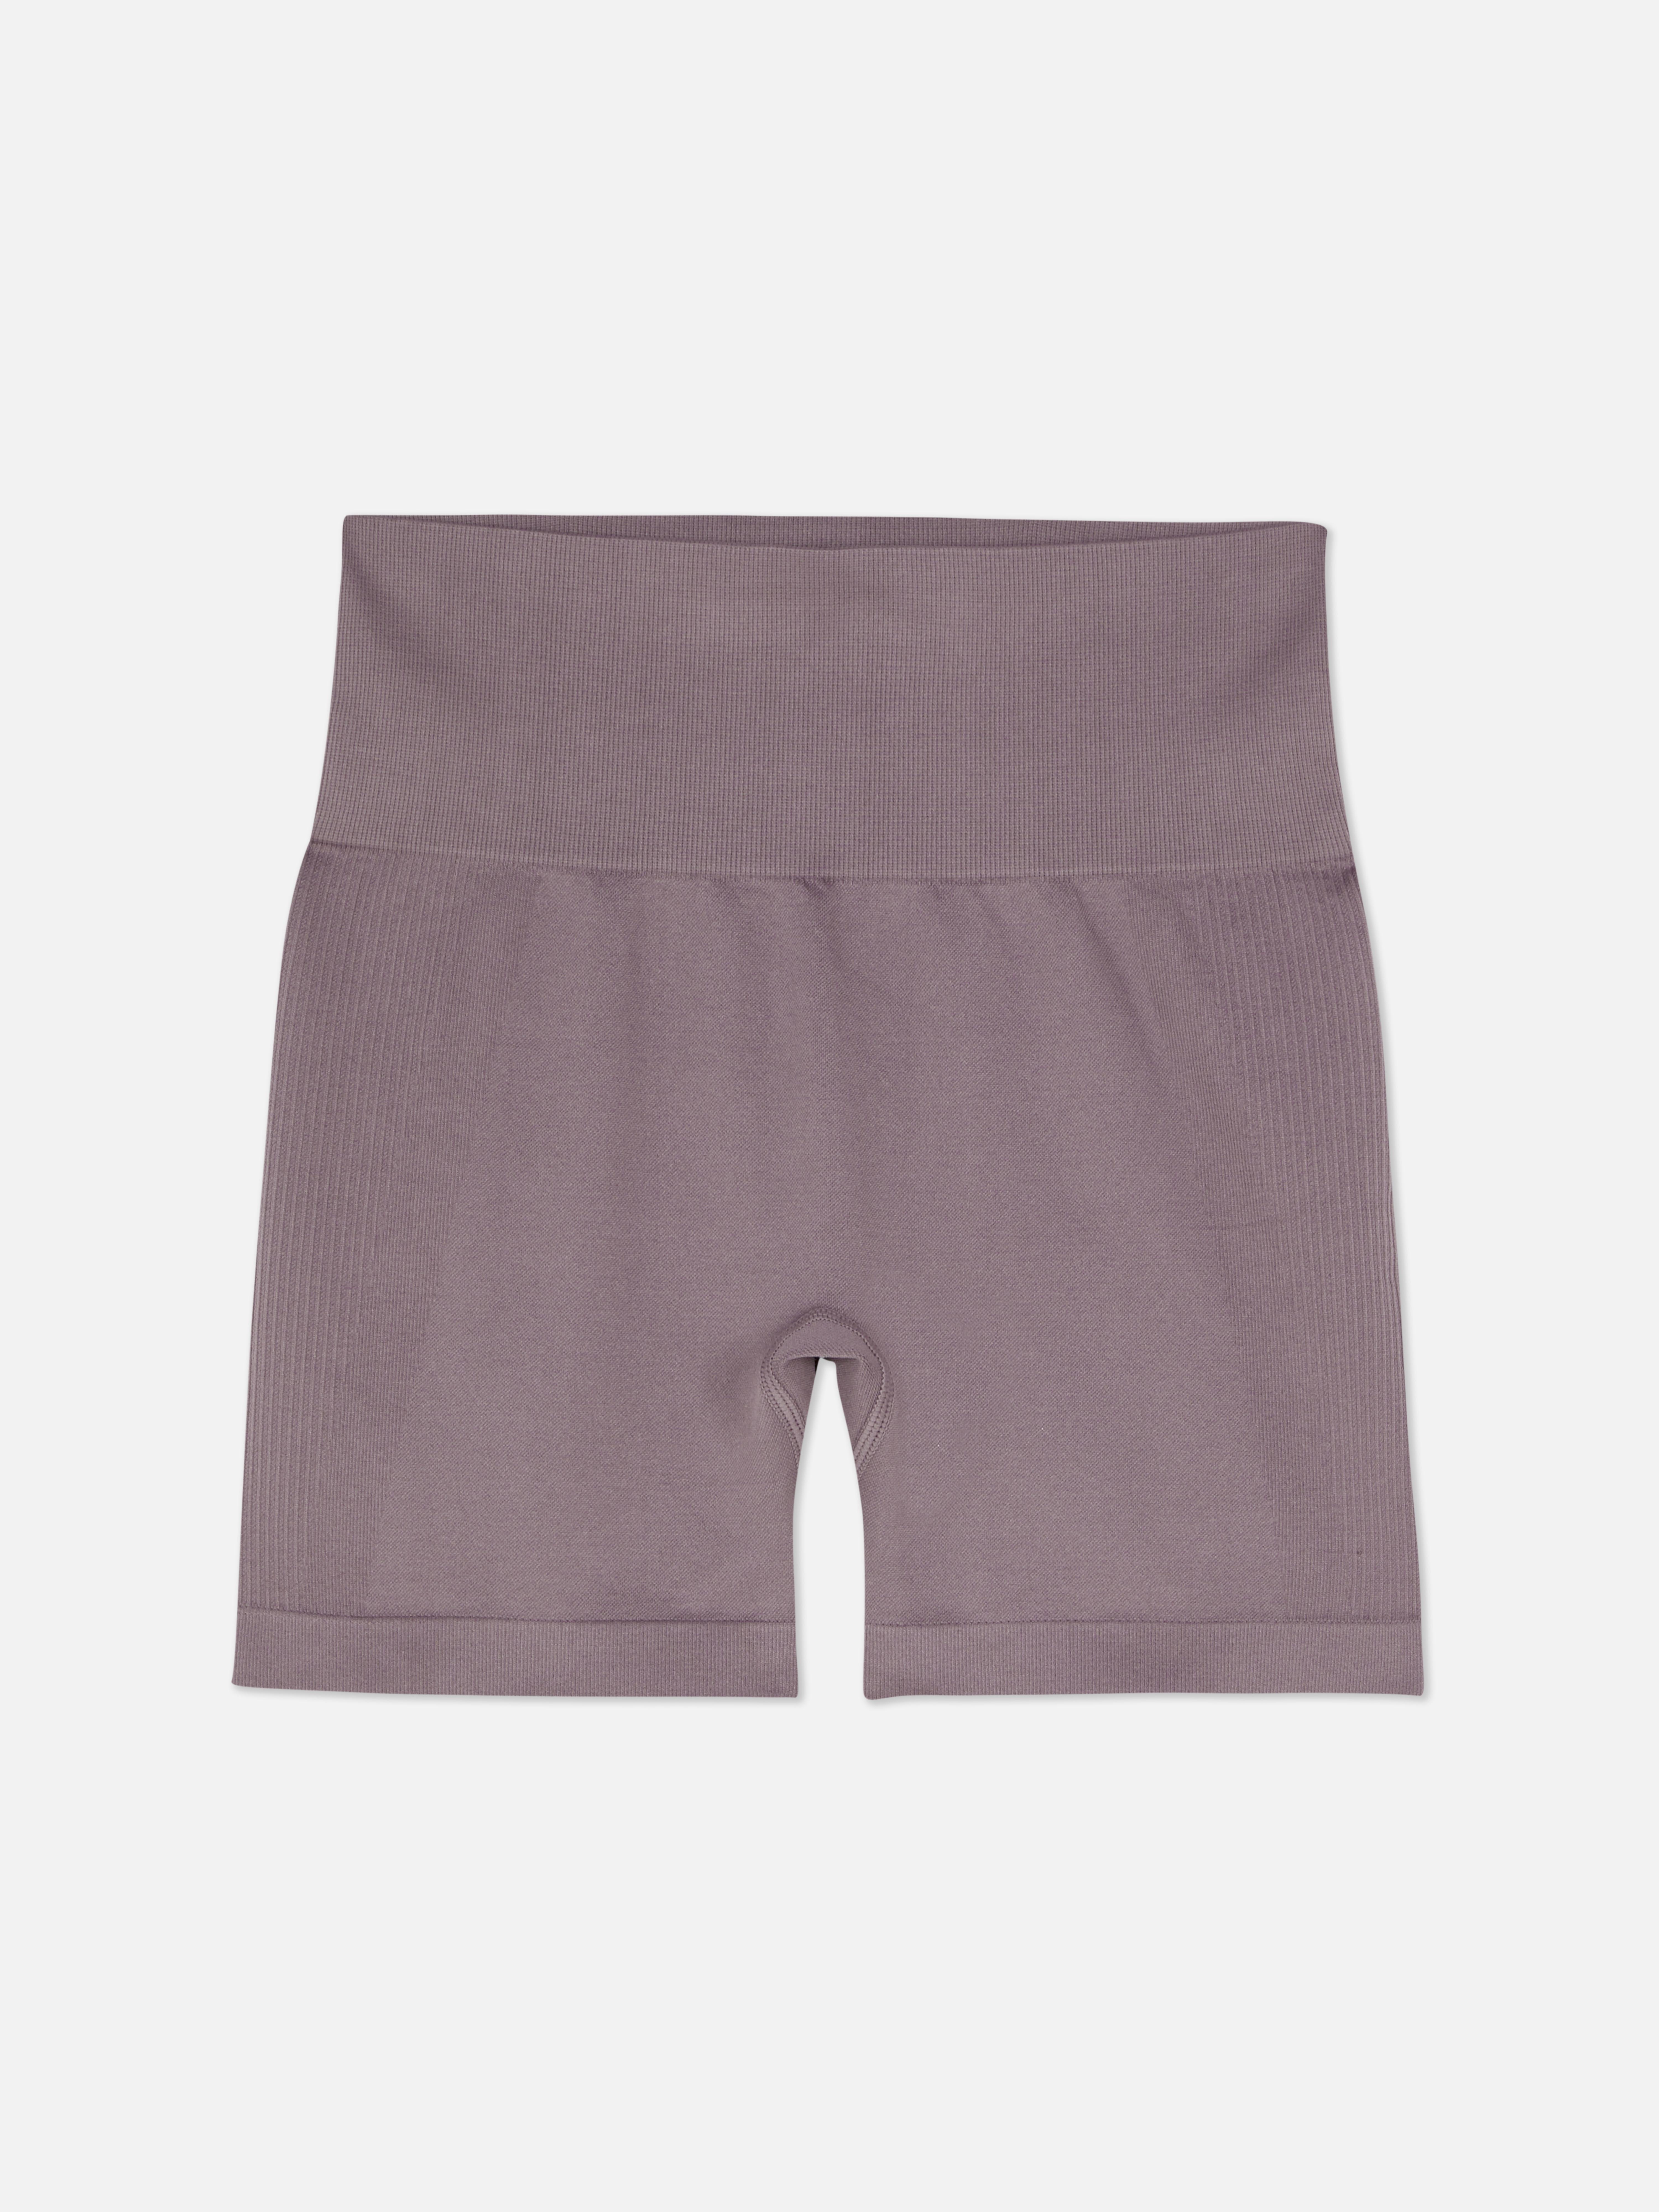 Primark seamless lilac cycling shorts high waisted